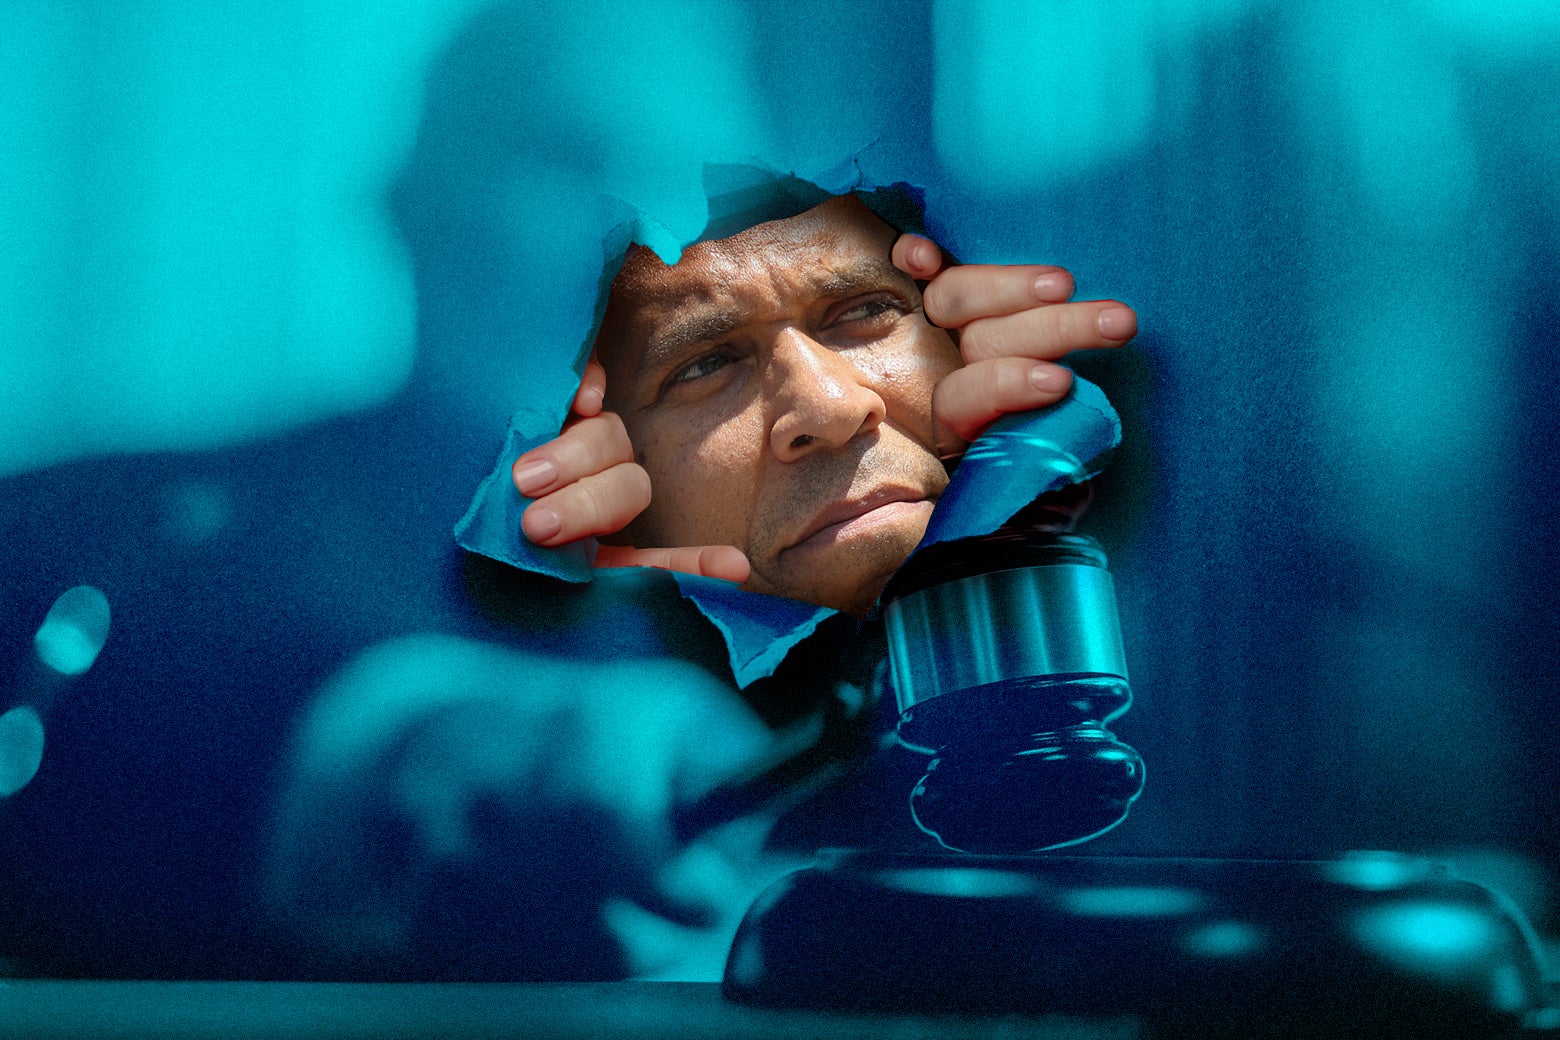 A photo illustration of Cory Booker peeking through a tear in another image of a judge with a gavel.